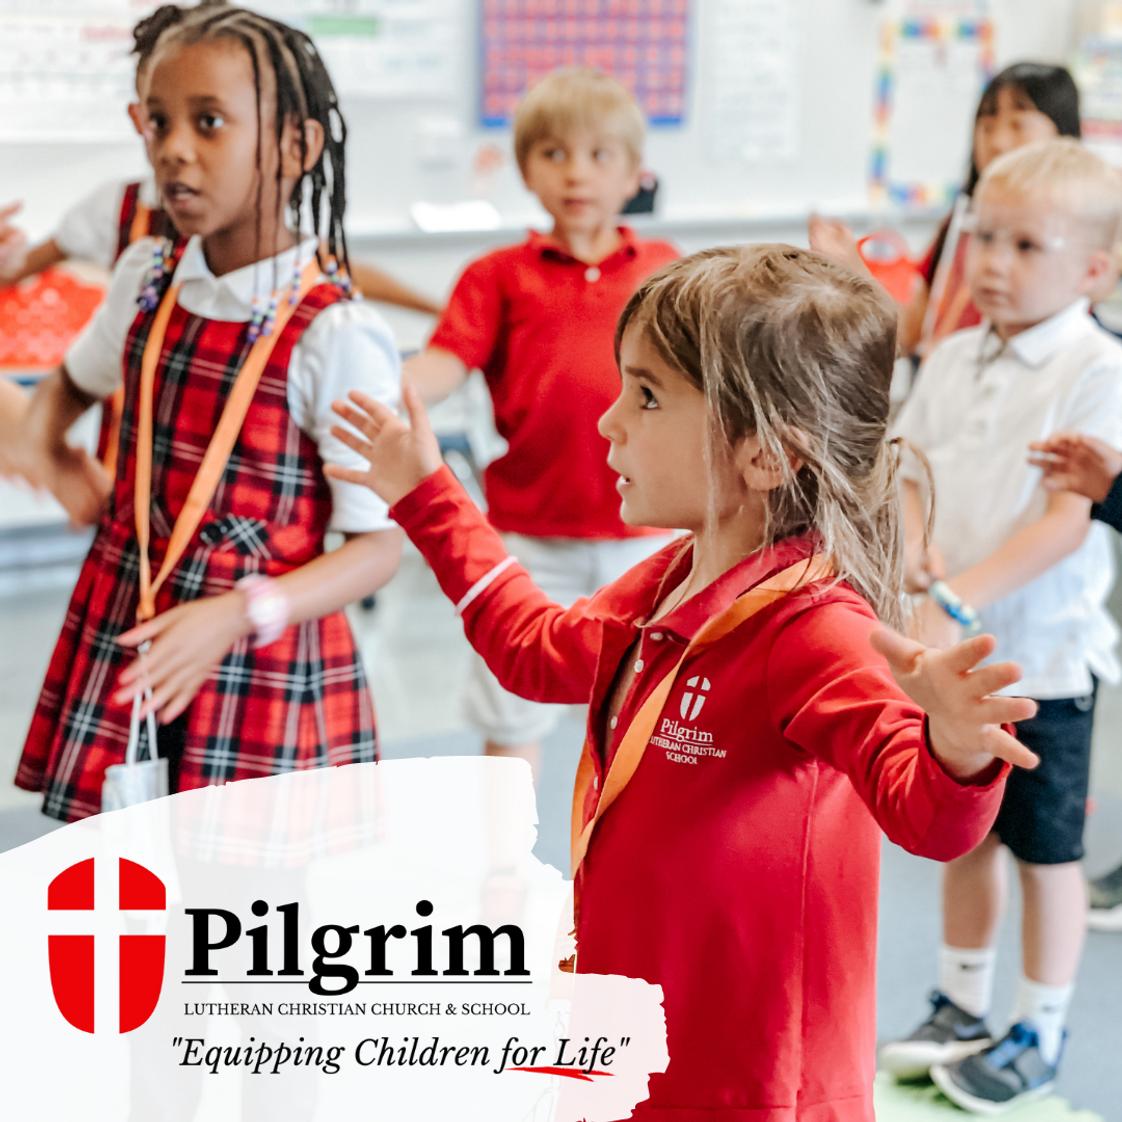 Pilgrim Lutheran Christian School Photo #1 - A private, Christian Education is now more important than ever. Contact us today to inquire about admissions or to apply.